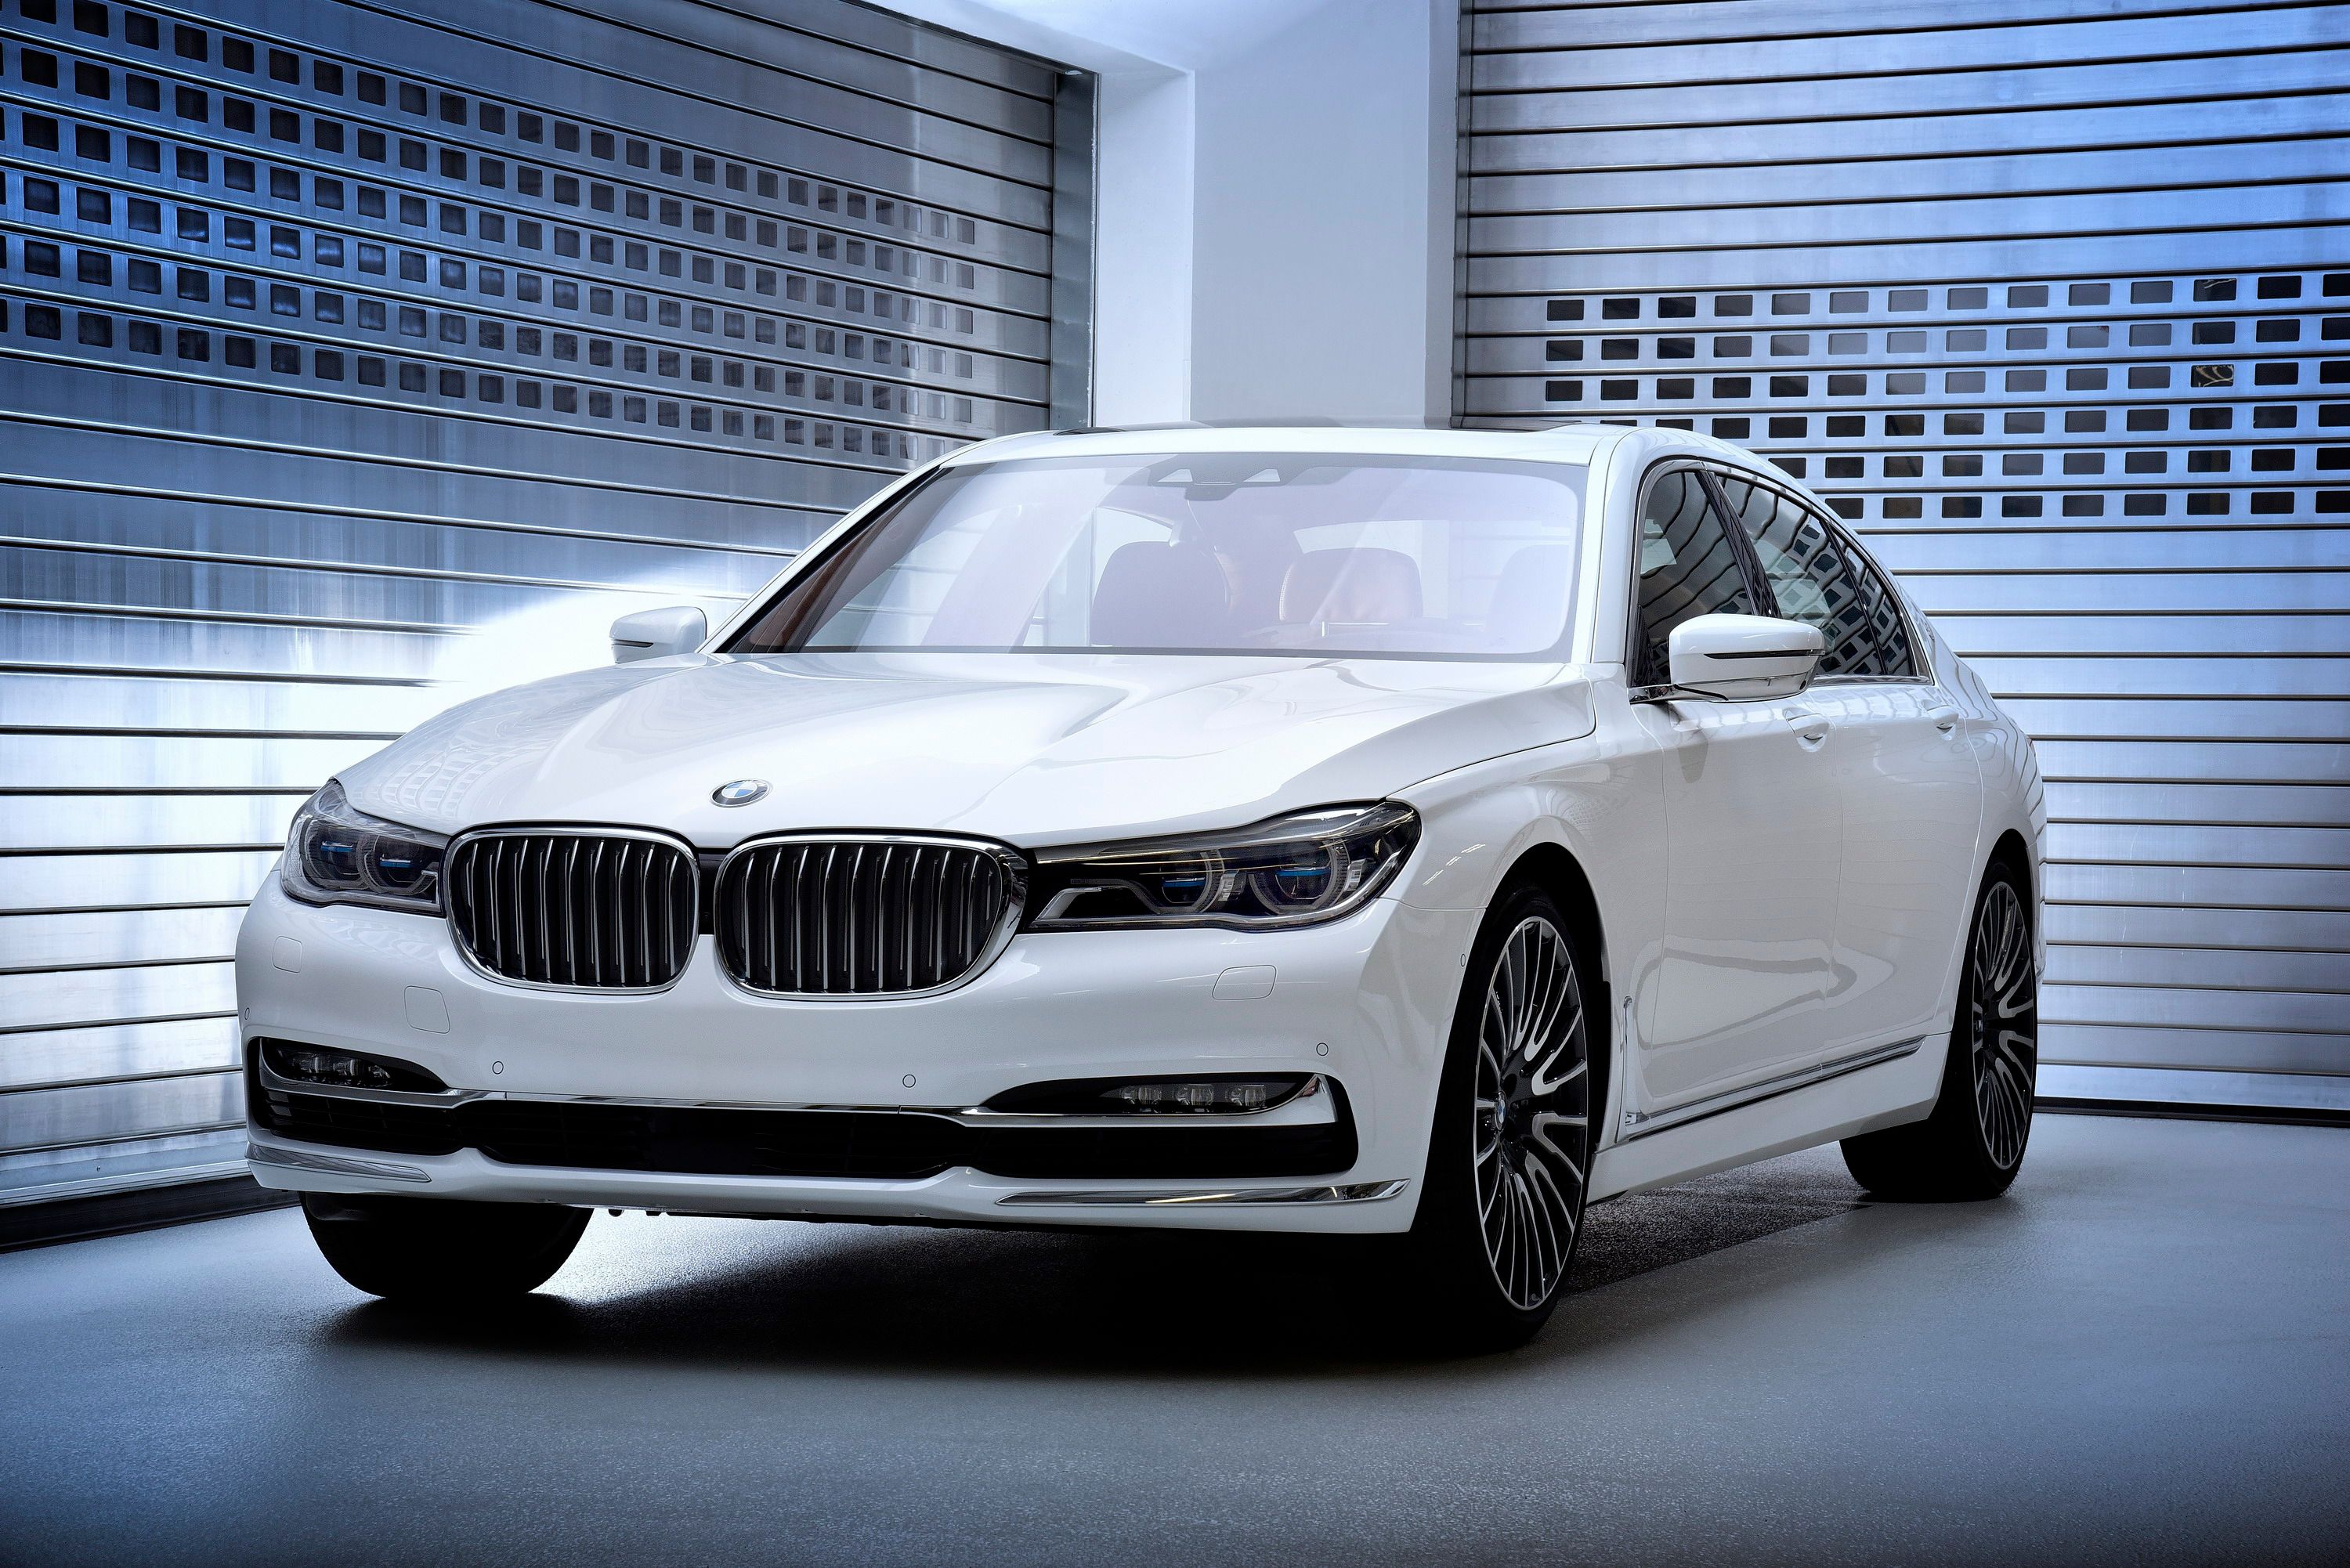 2016 BMW 750Li xDrive Solitaire and Master Class Edition